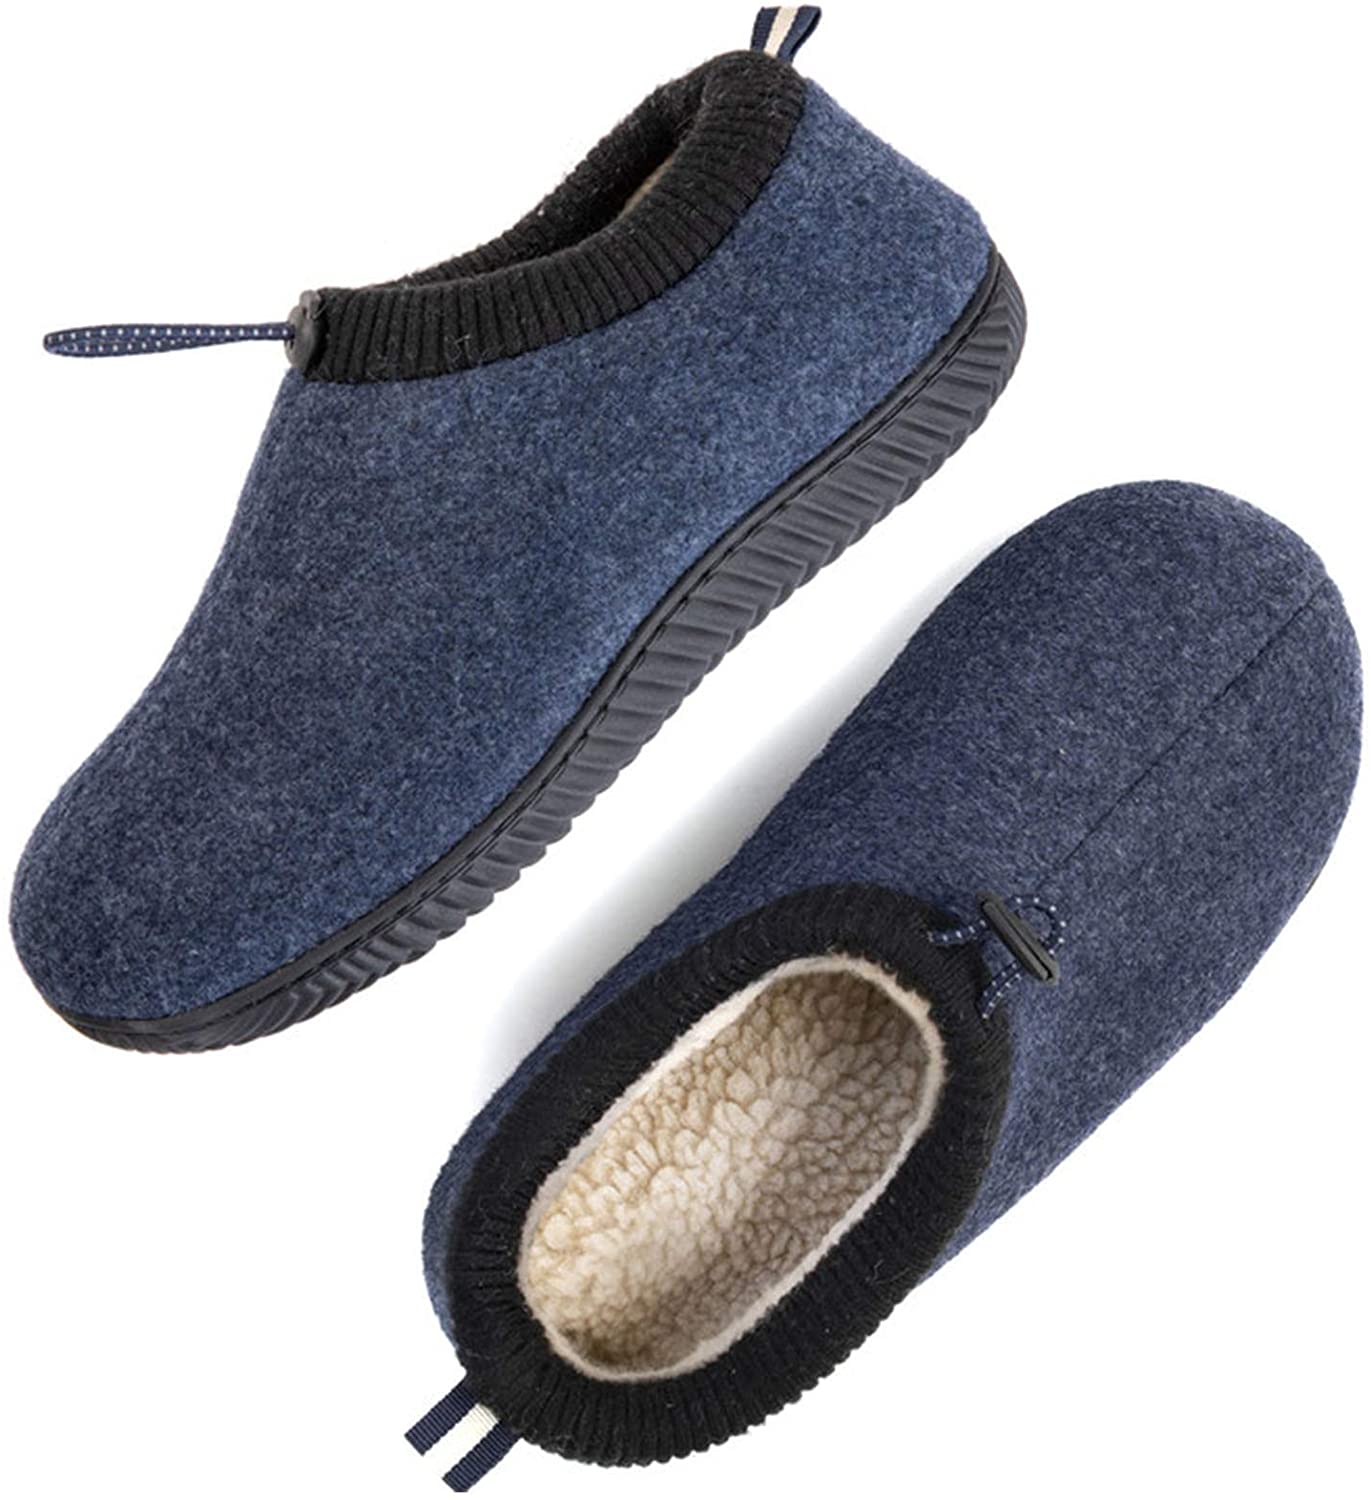 ULTRAIDEAS Mens Cozy Memory Foam Woolen Slippers with Elasticated Collar Warm Closed Back House Shoes with Indoor Outdoor Anti-Skid Rubber Sole 